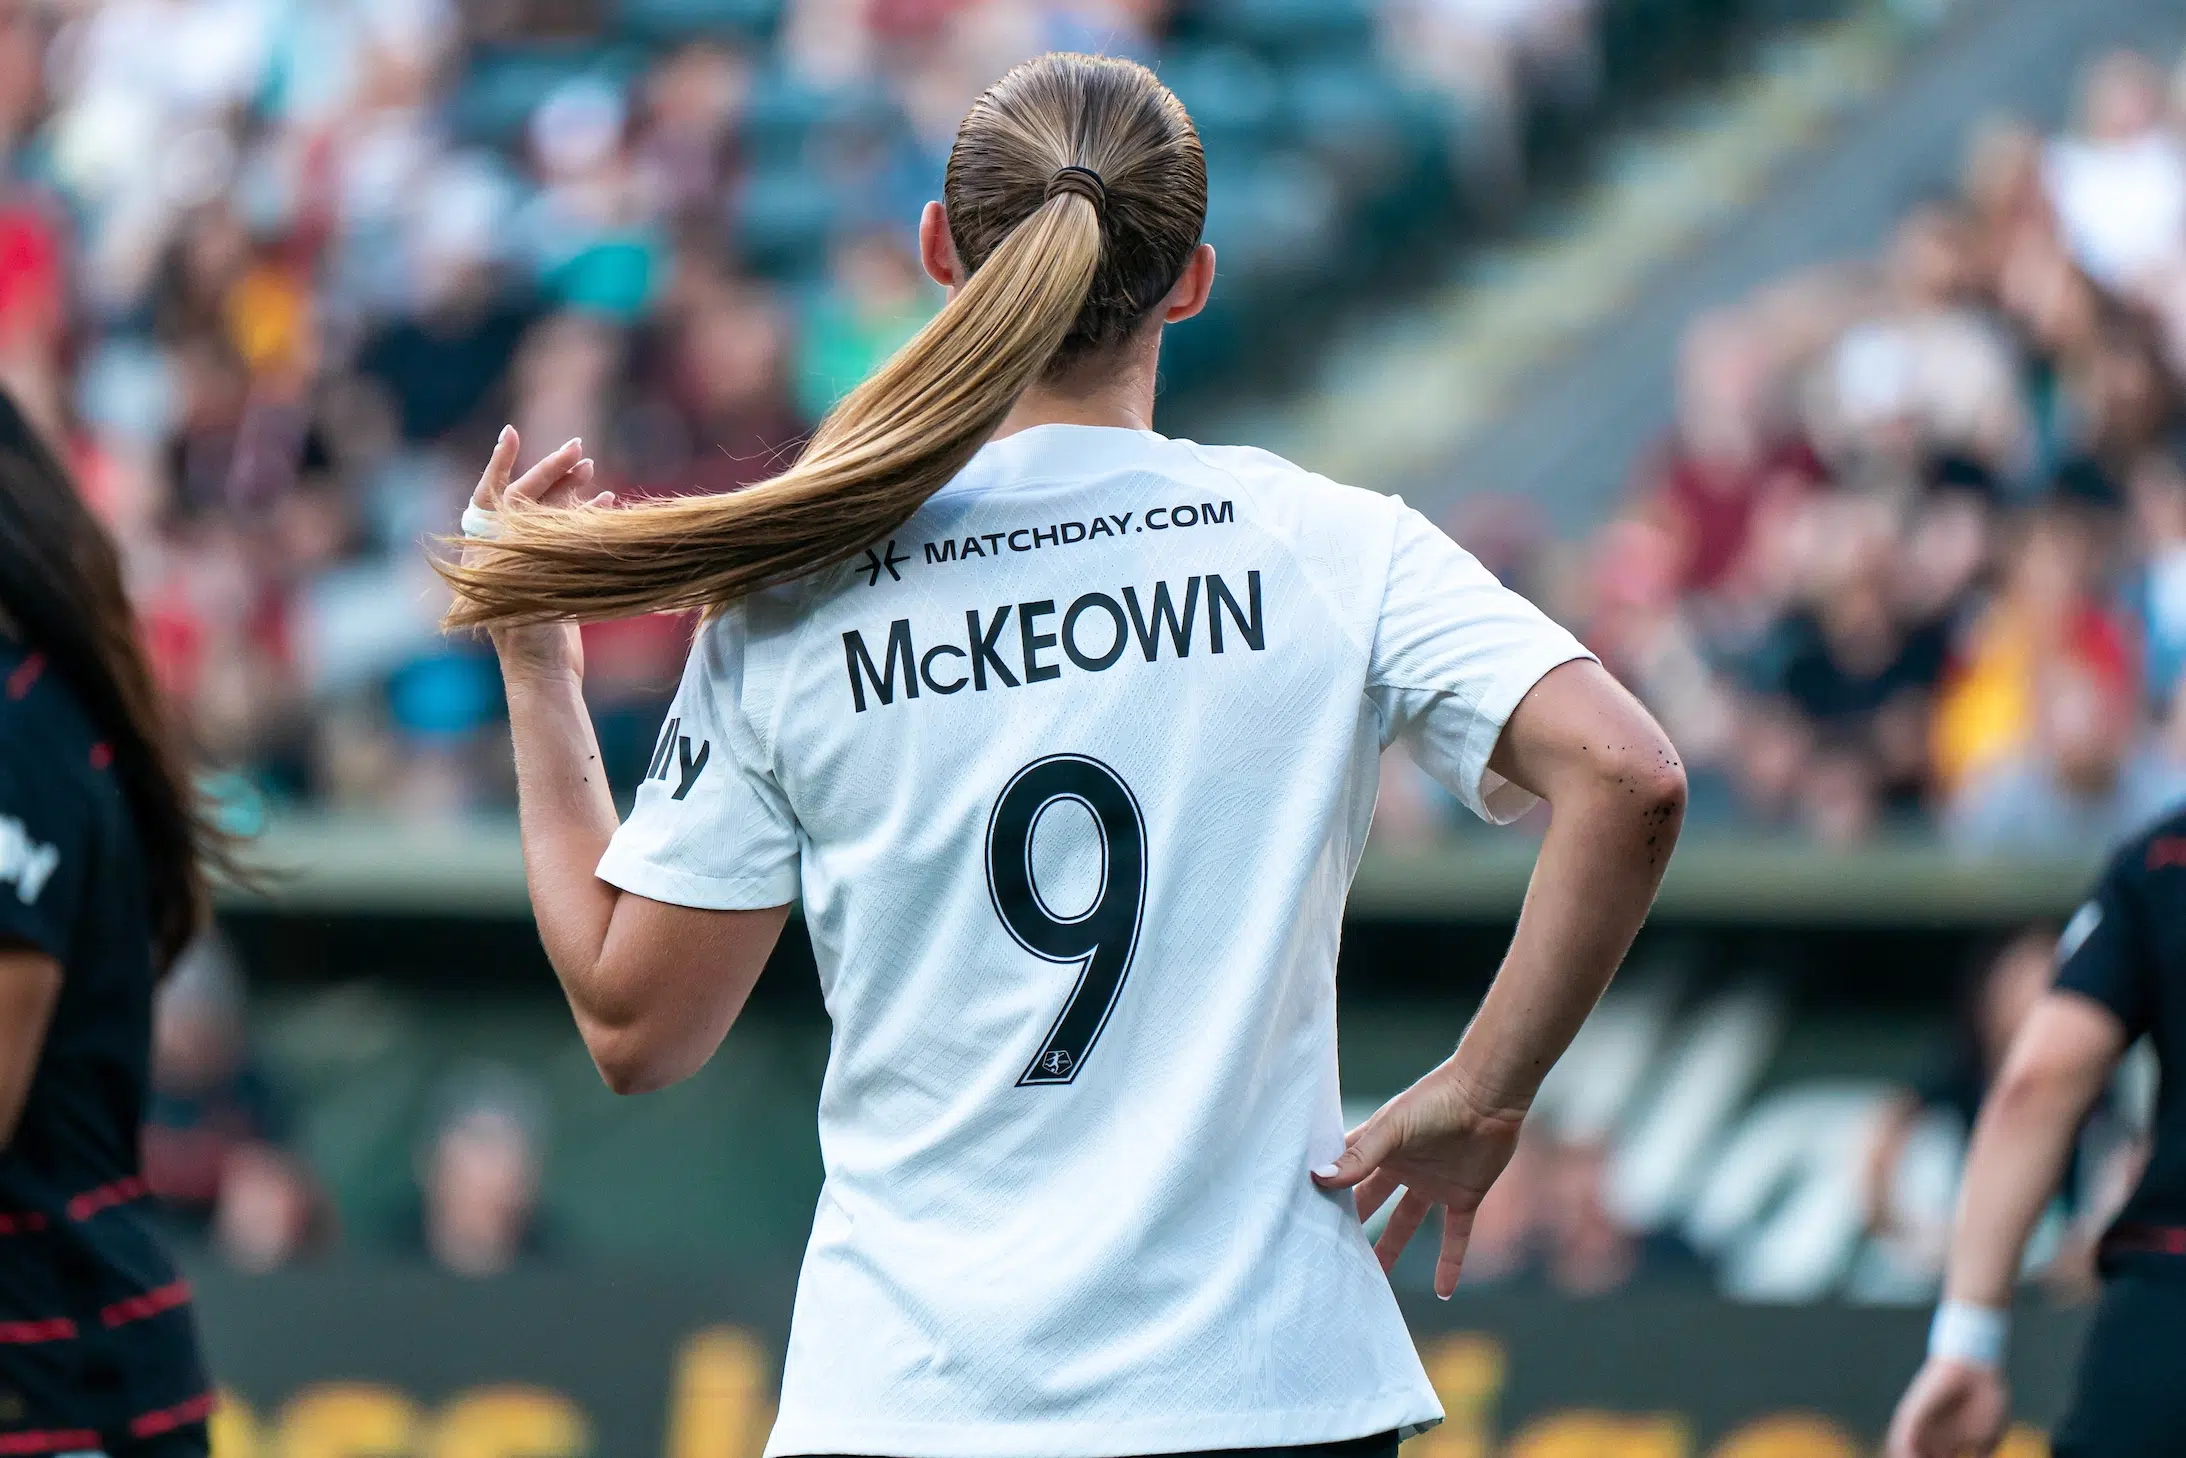 Tara McKeown fixes her ponytail, revealing her last name and number 9 on the back of her jersey.